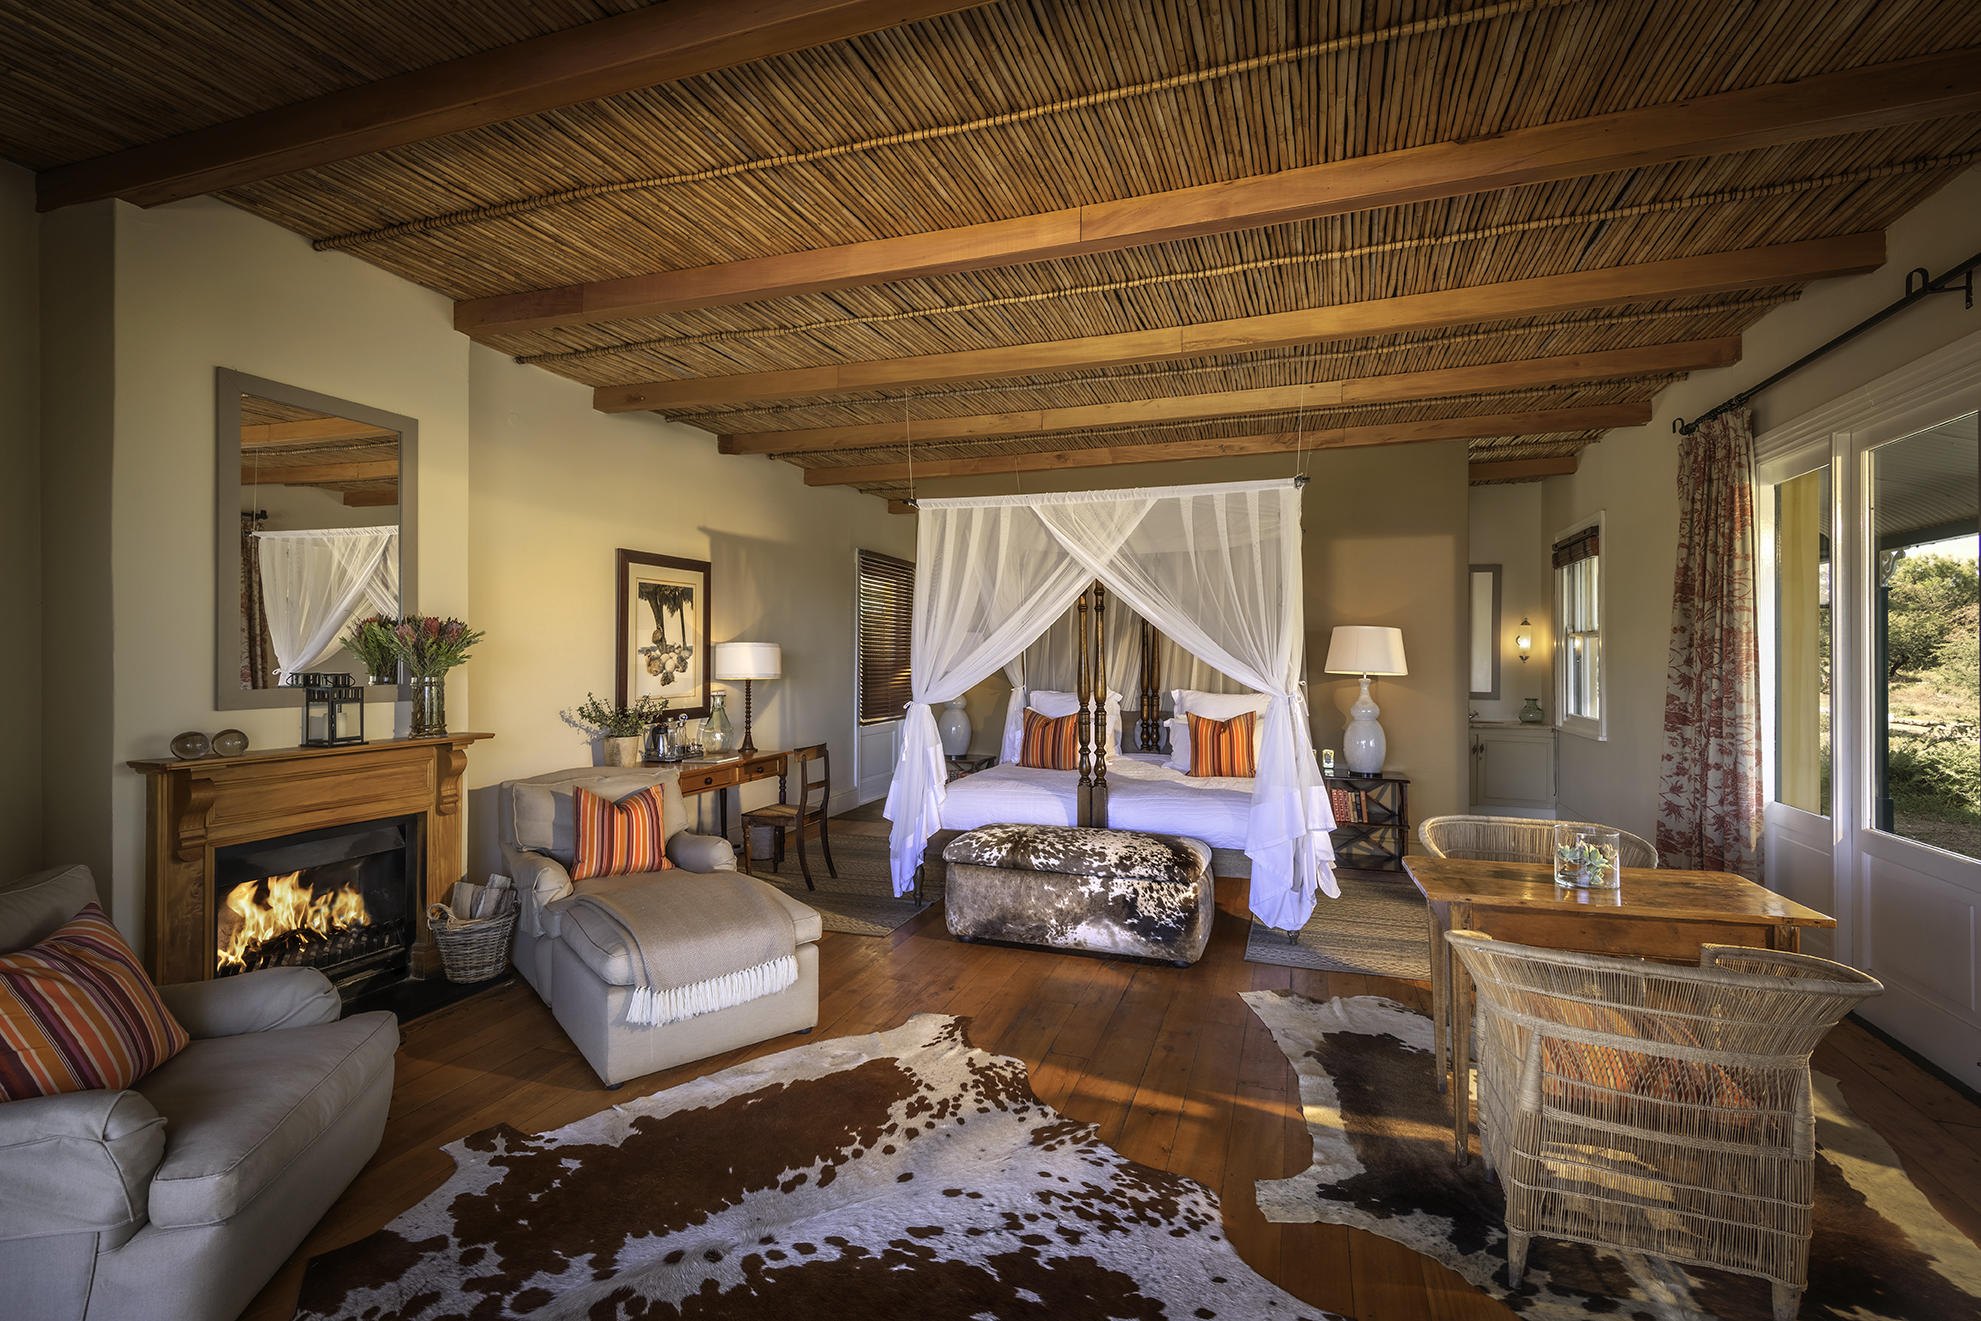 Each Karoo Suite is individually decorated